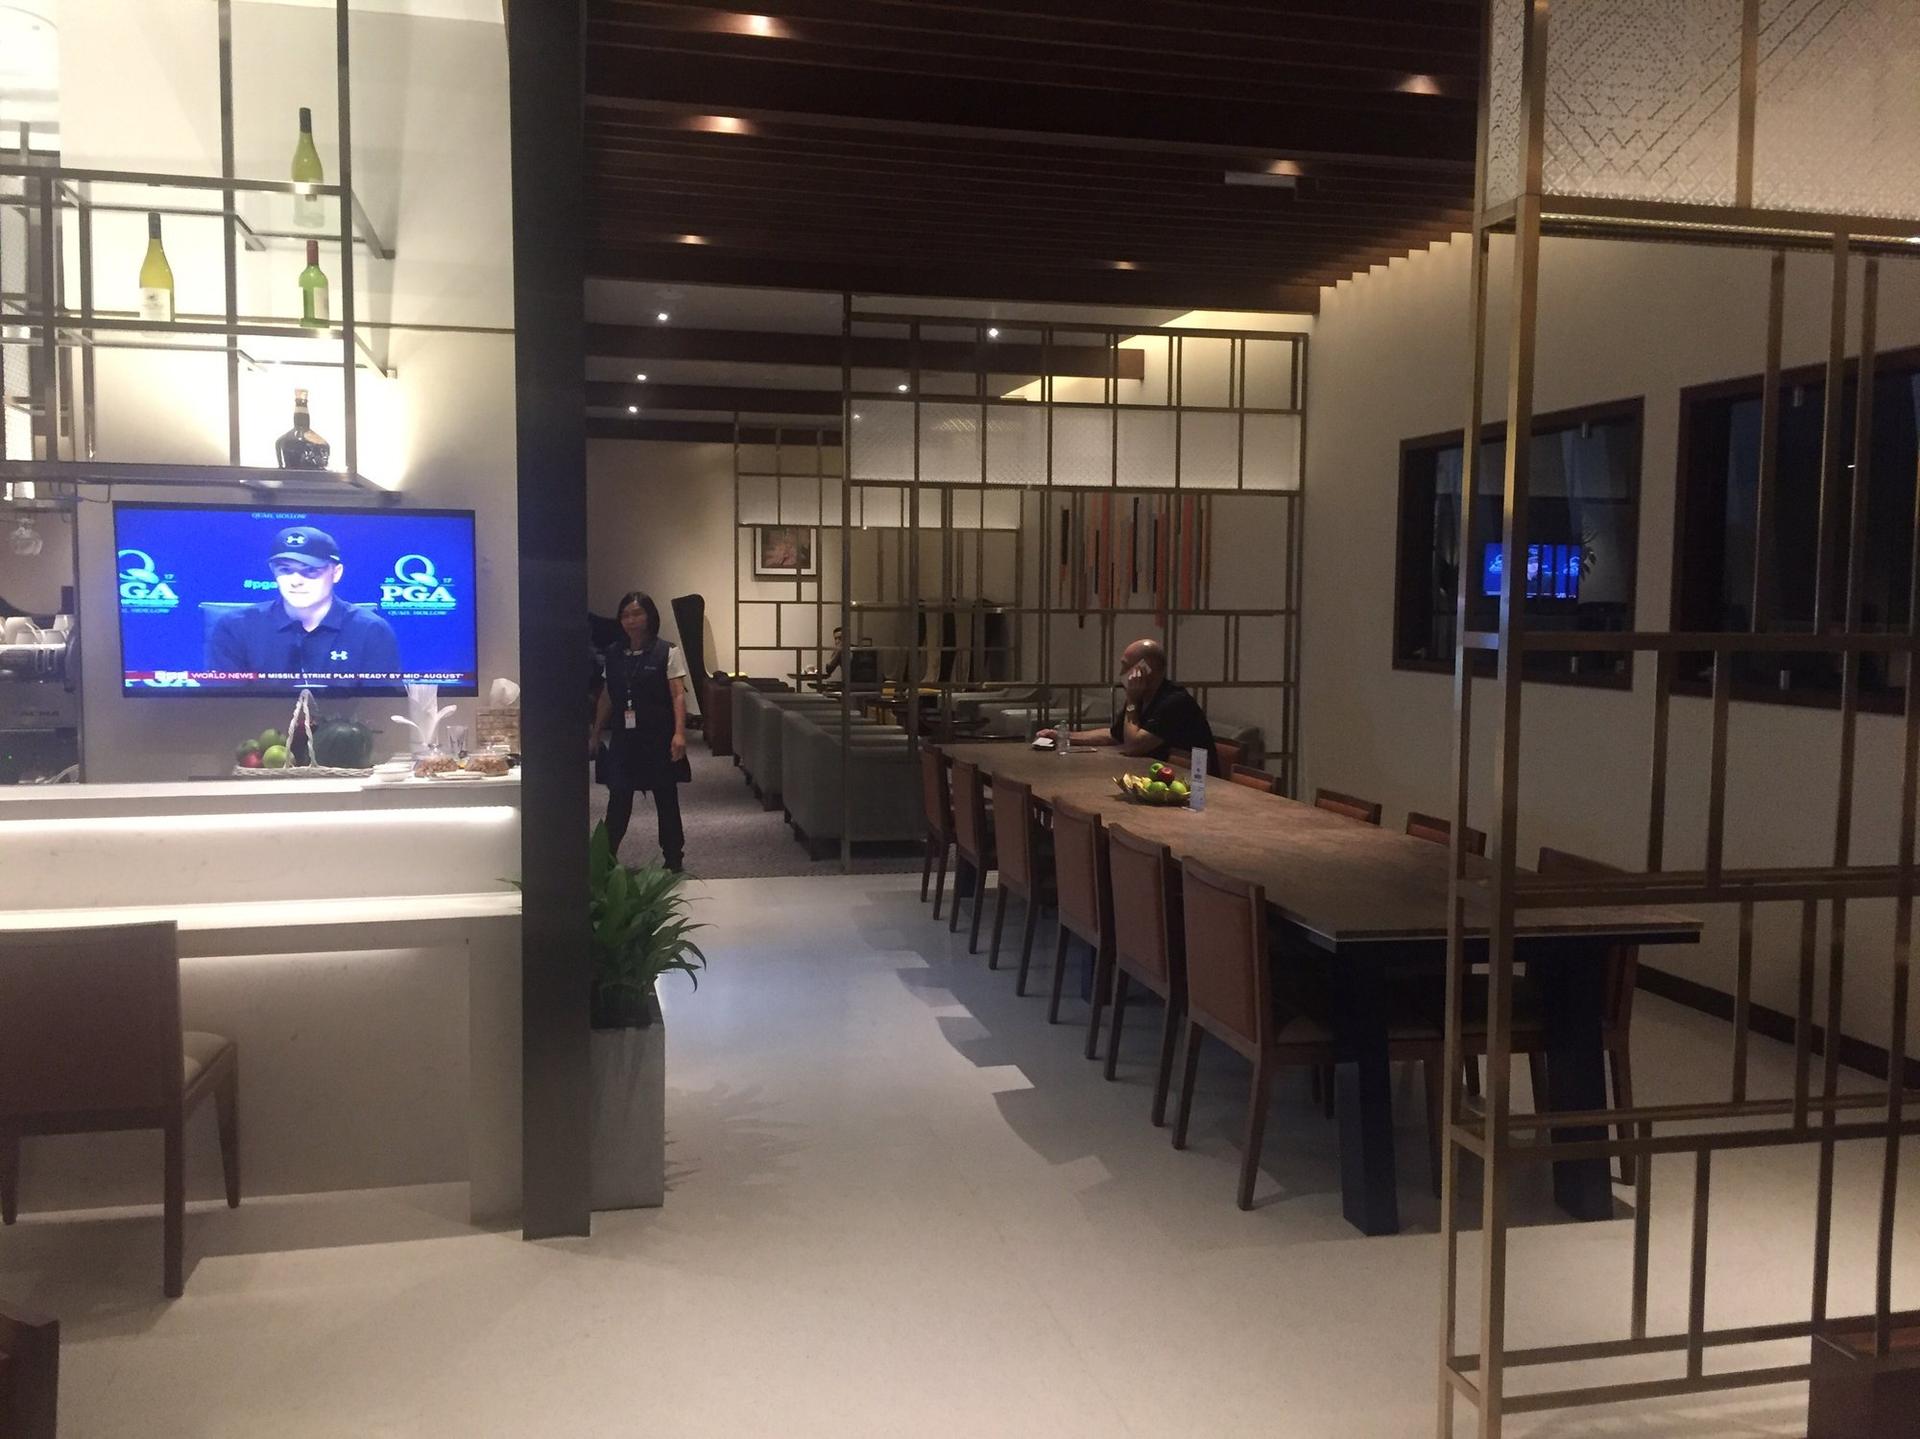 Singapore Airlines SilverKris Business Class Lounge image 9 of 16